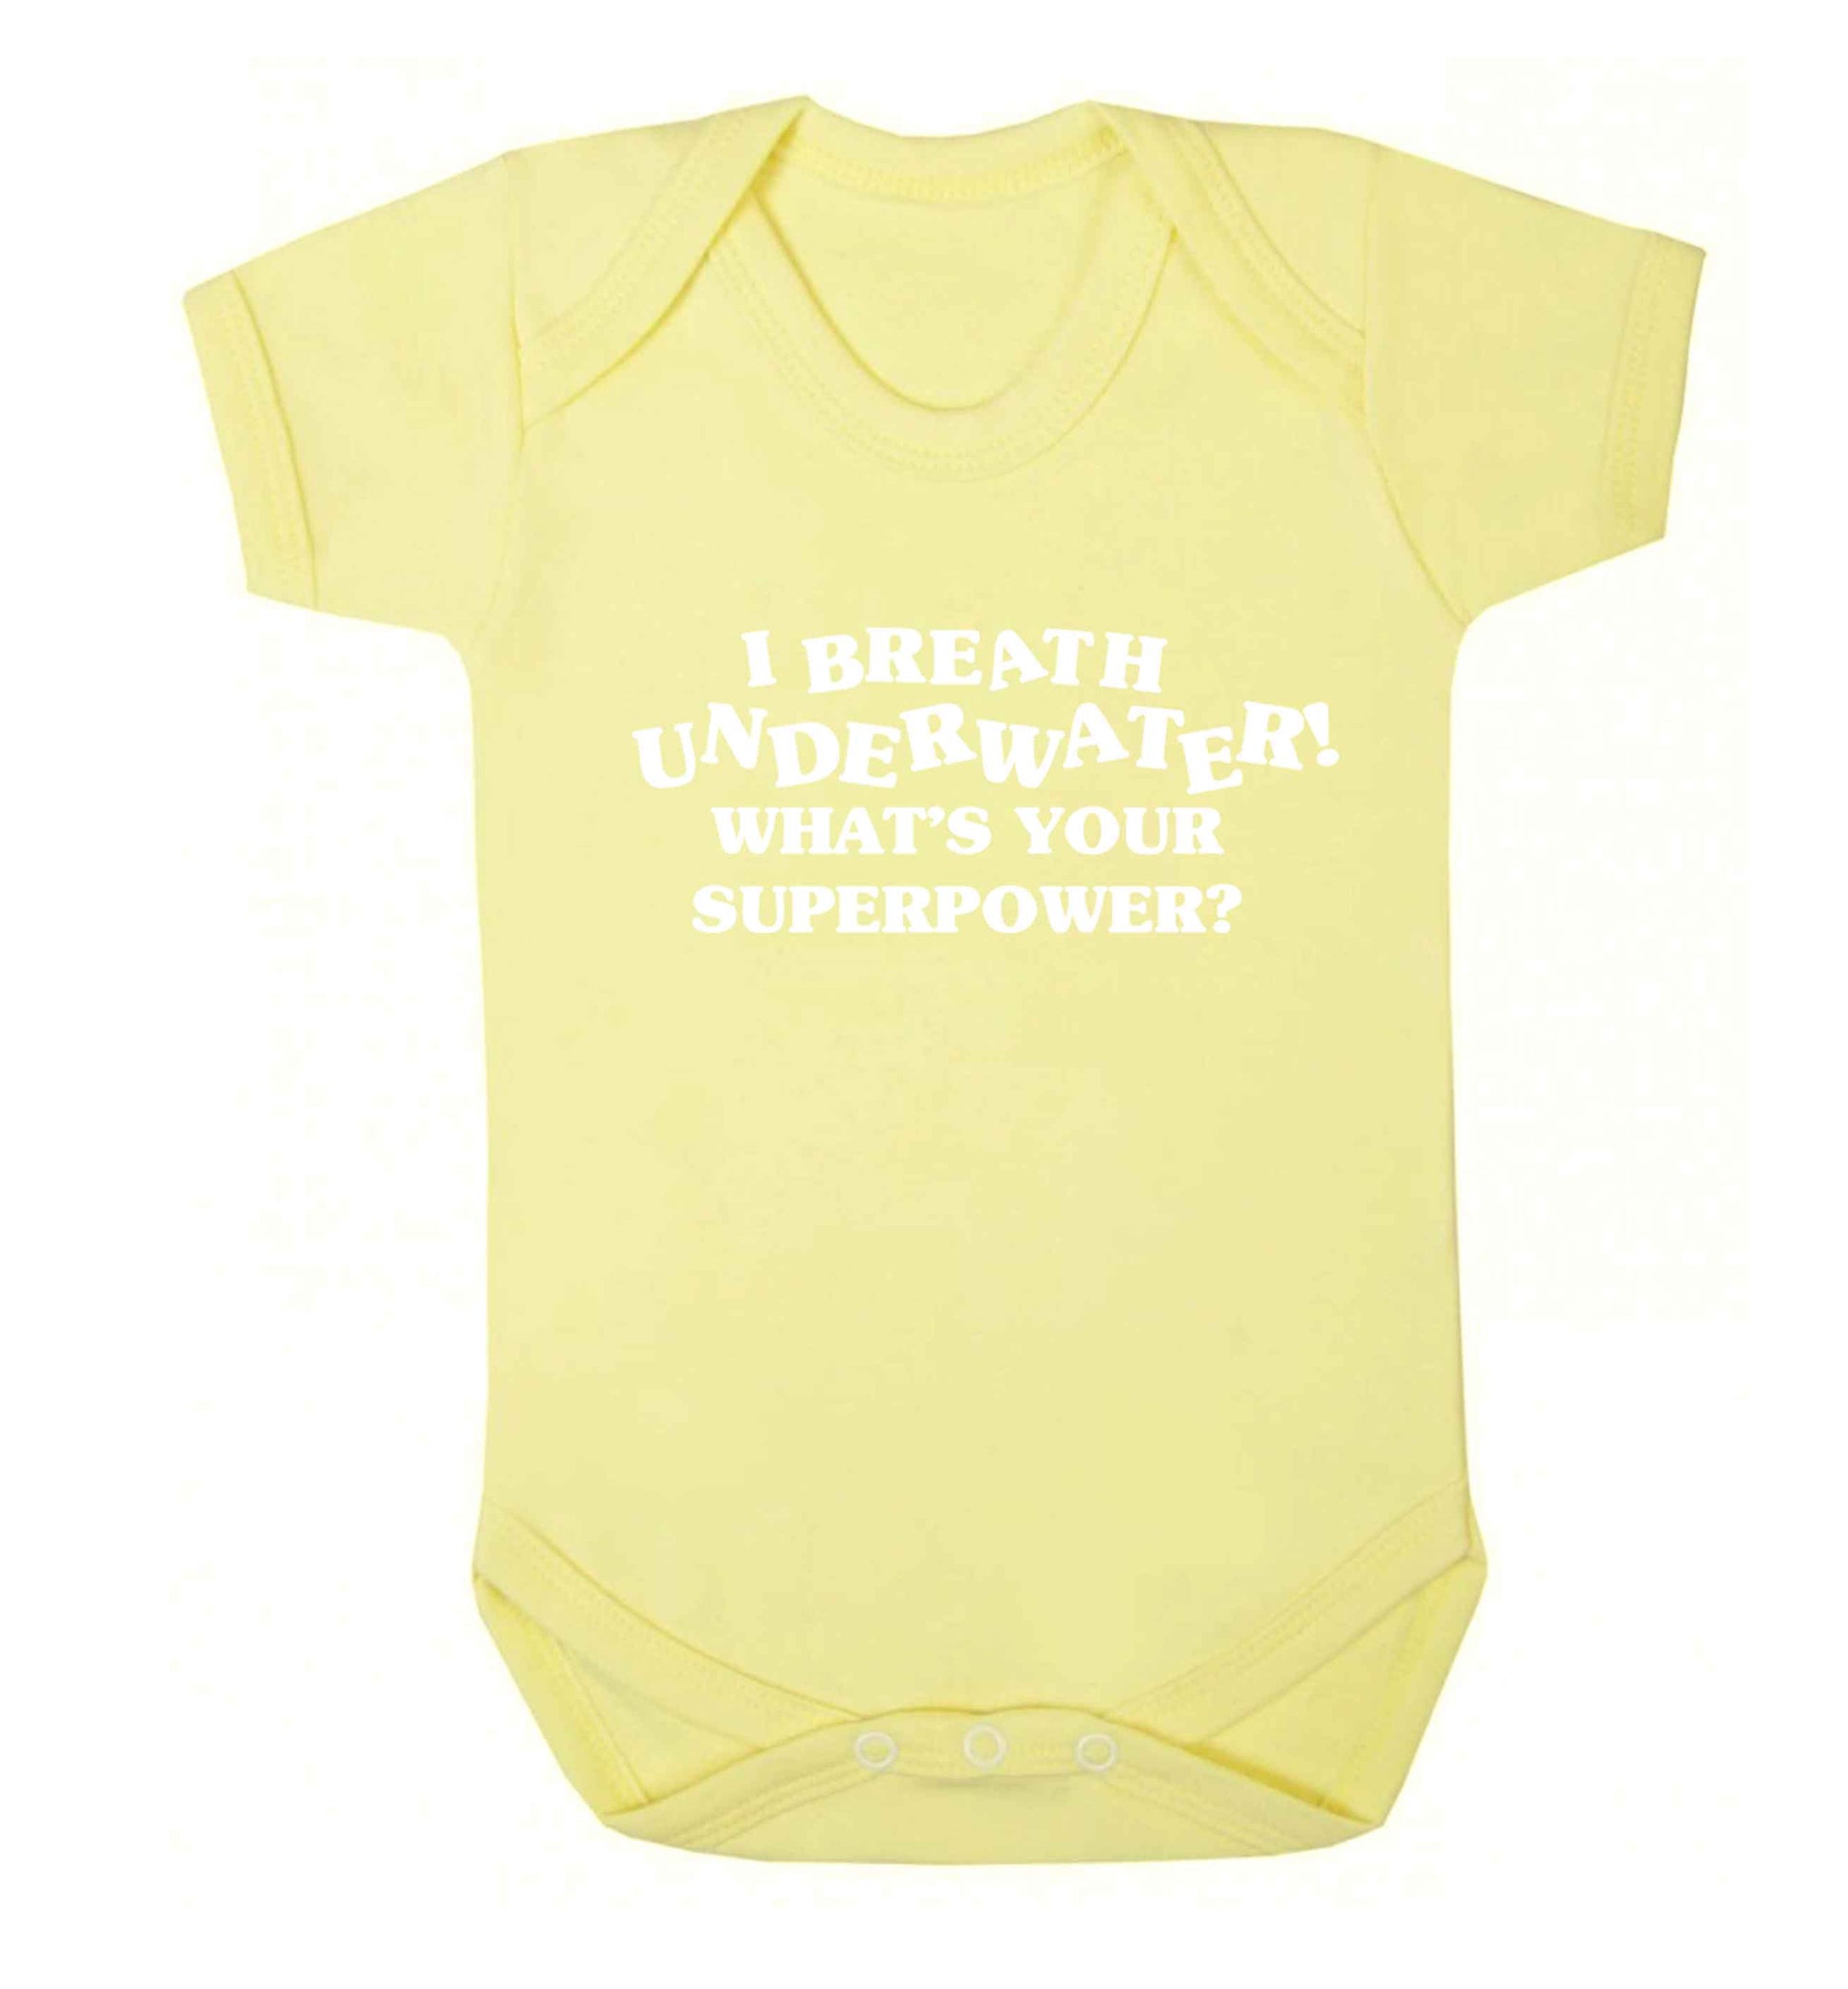 I breath underwater what's your superpower? Baby Vest pale yellow 18-24 months